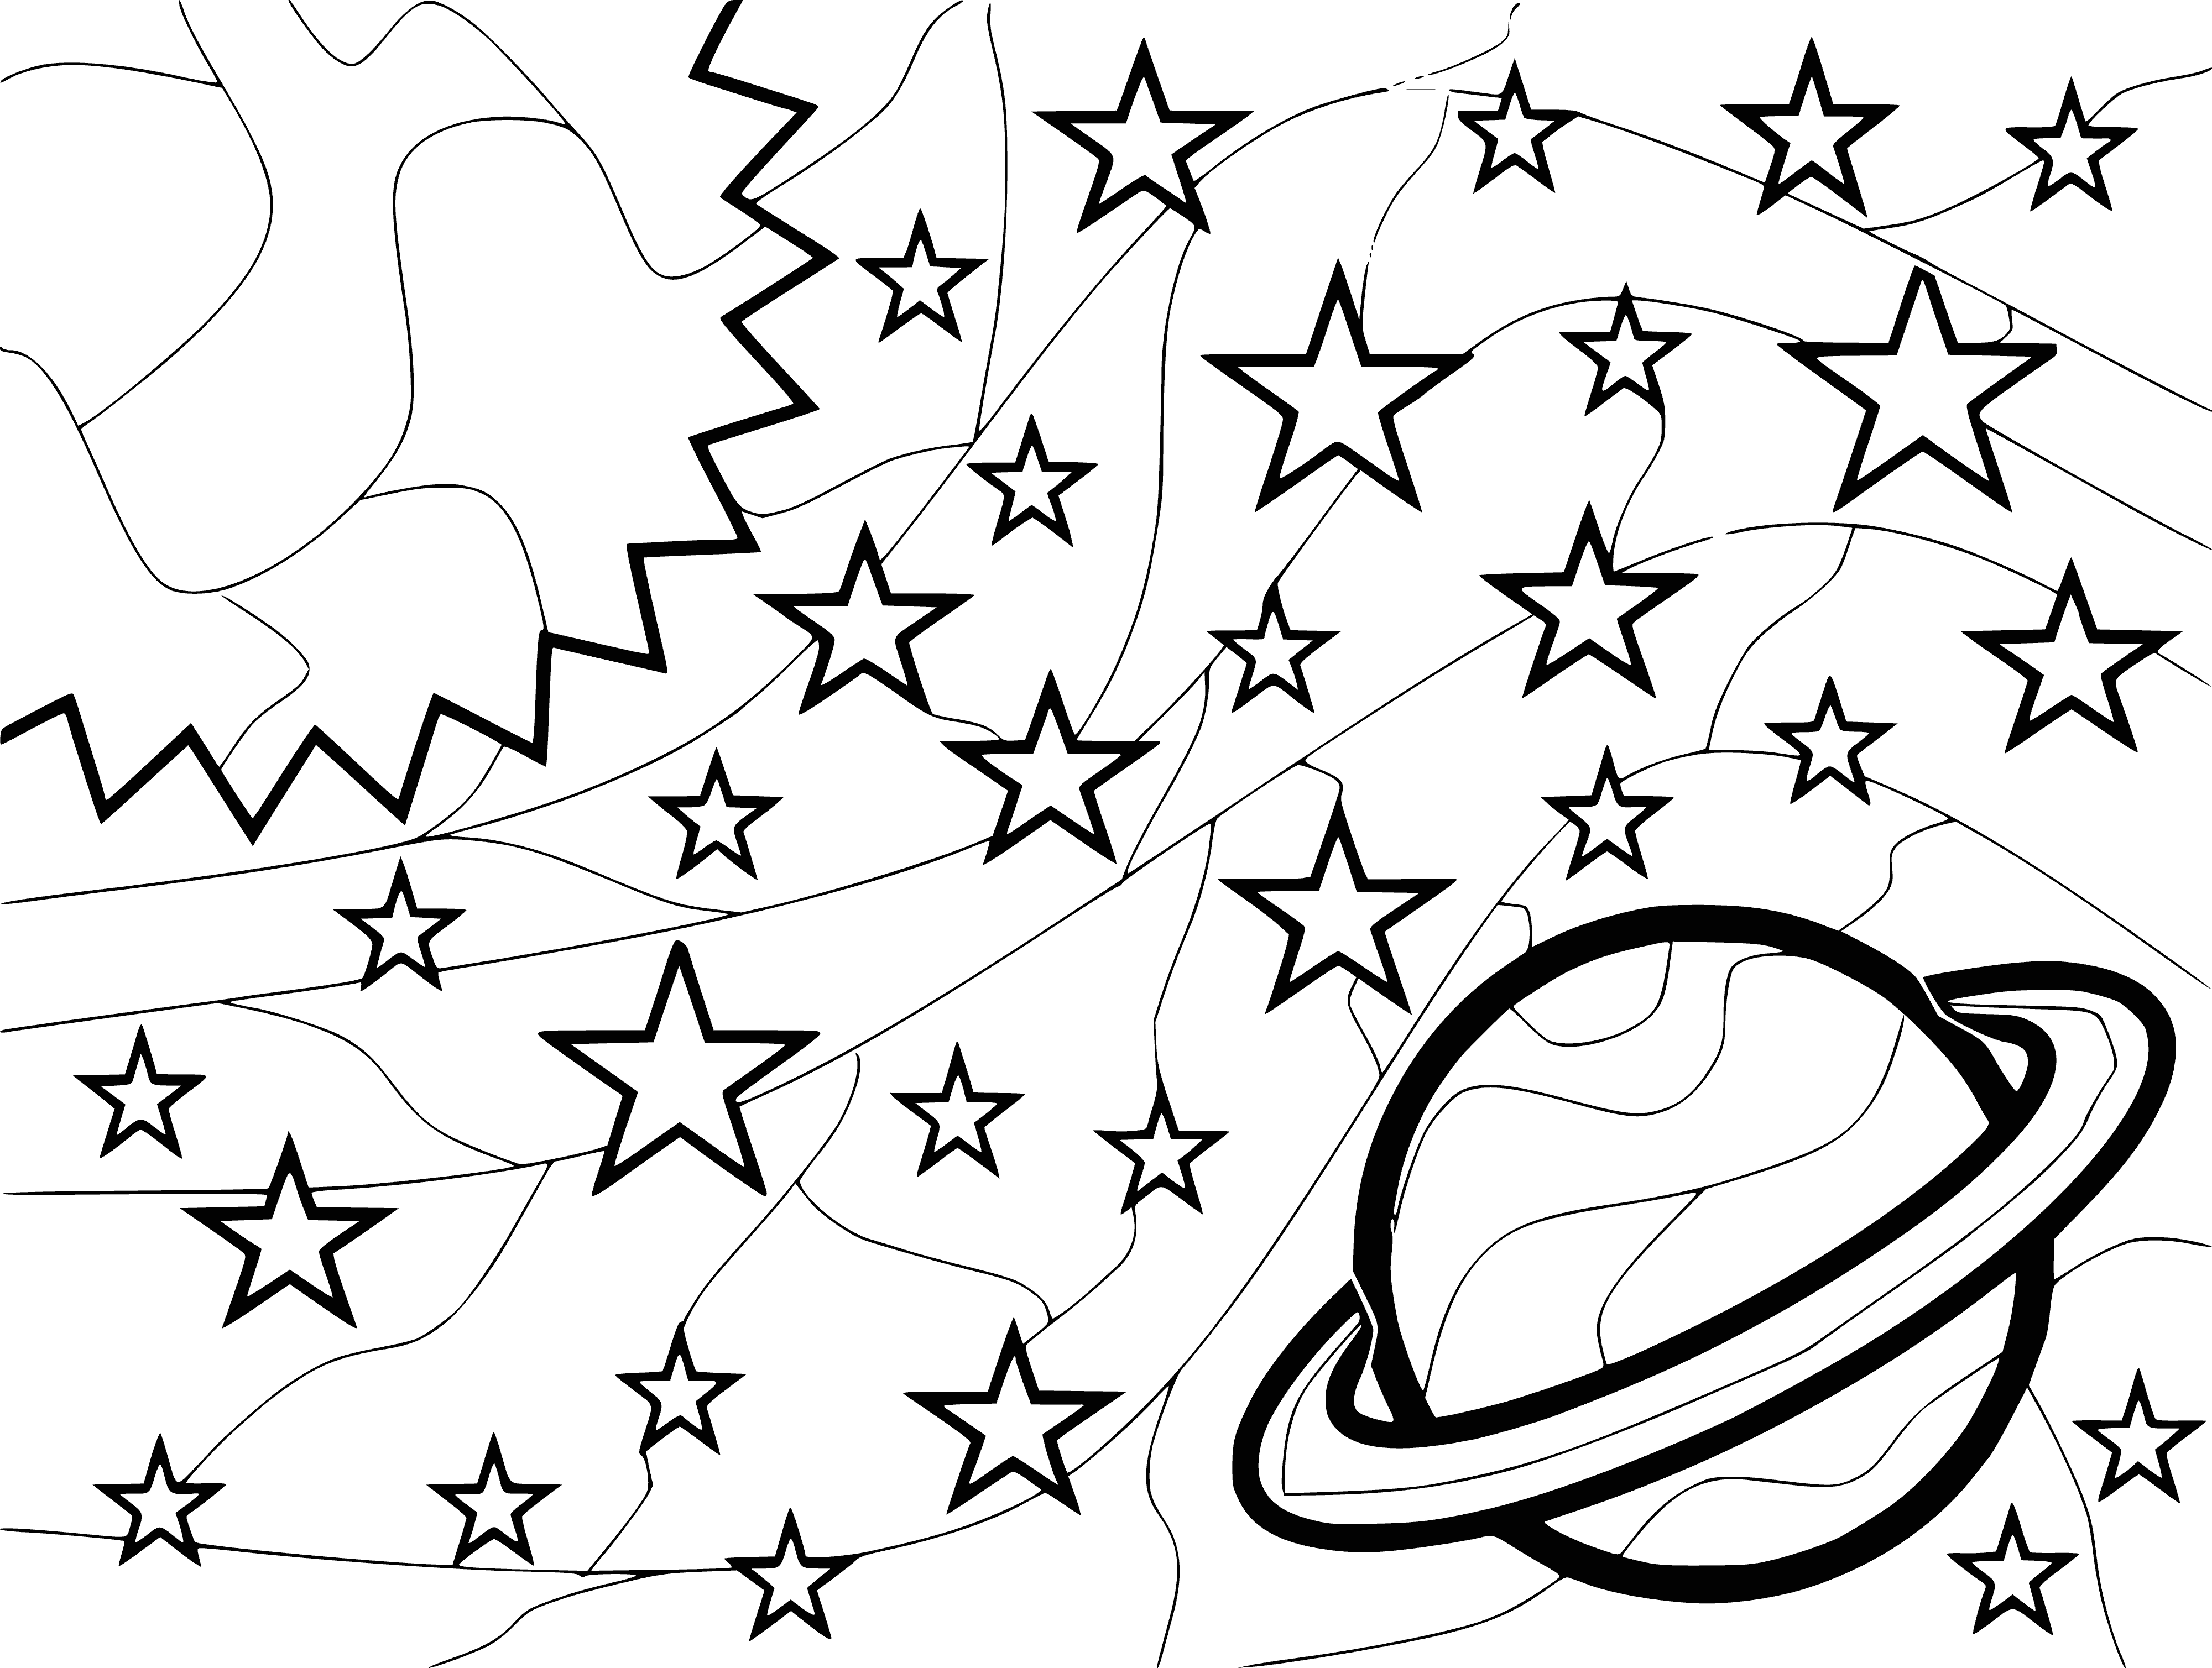 coloring page: Large, dark blue galaxy in center of page surrounded by lighter blue galaxies with white space object at center, curved tail.